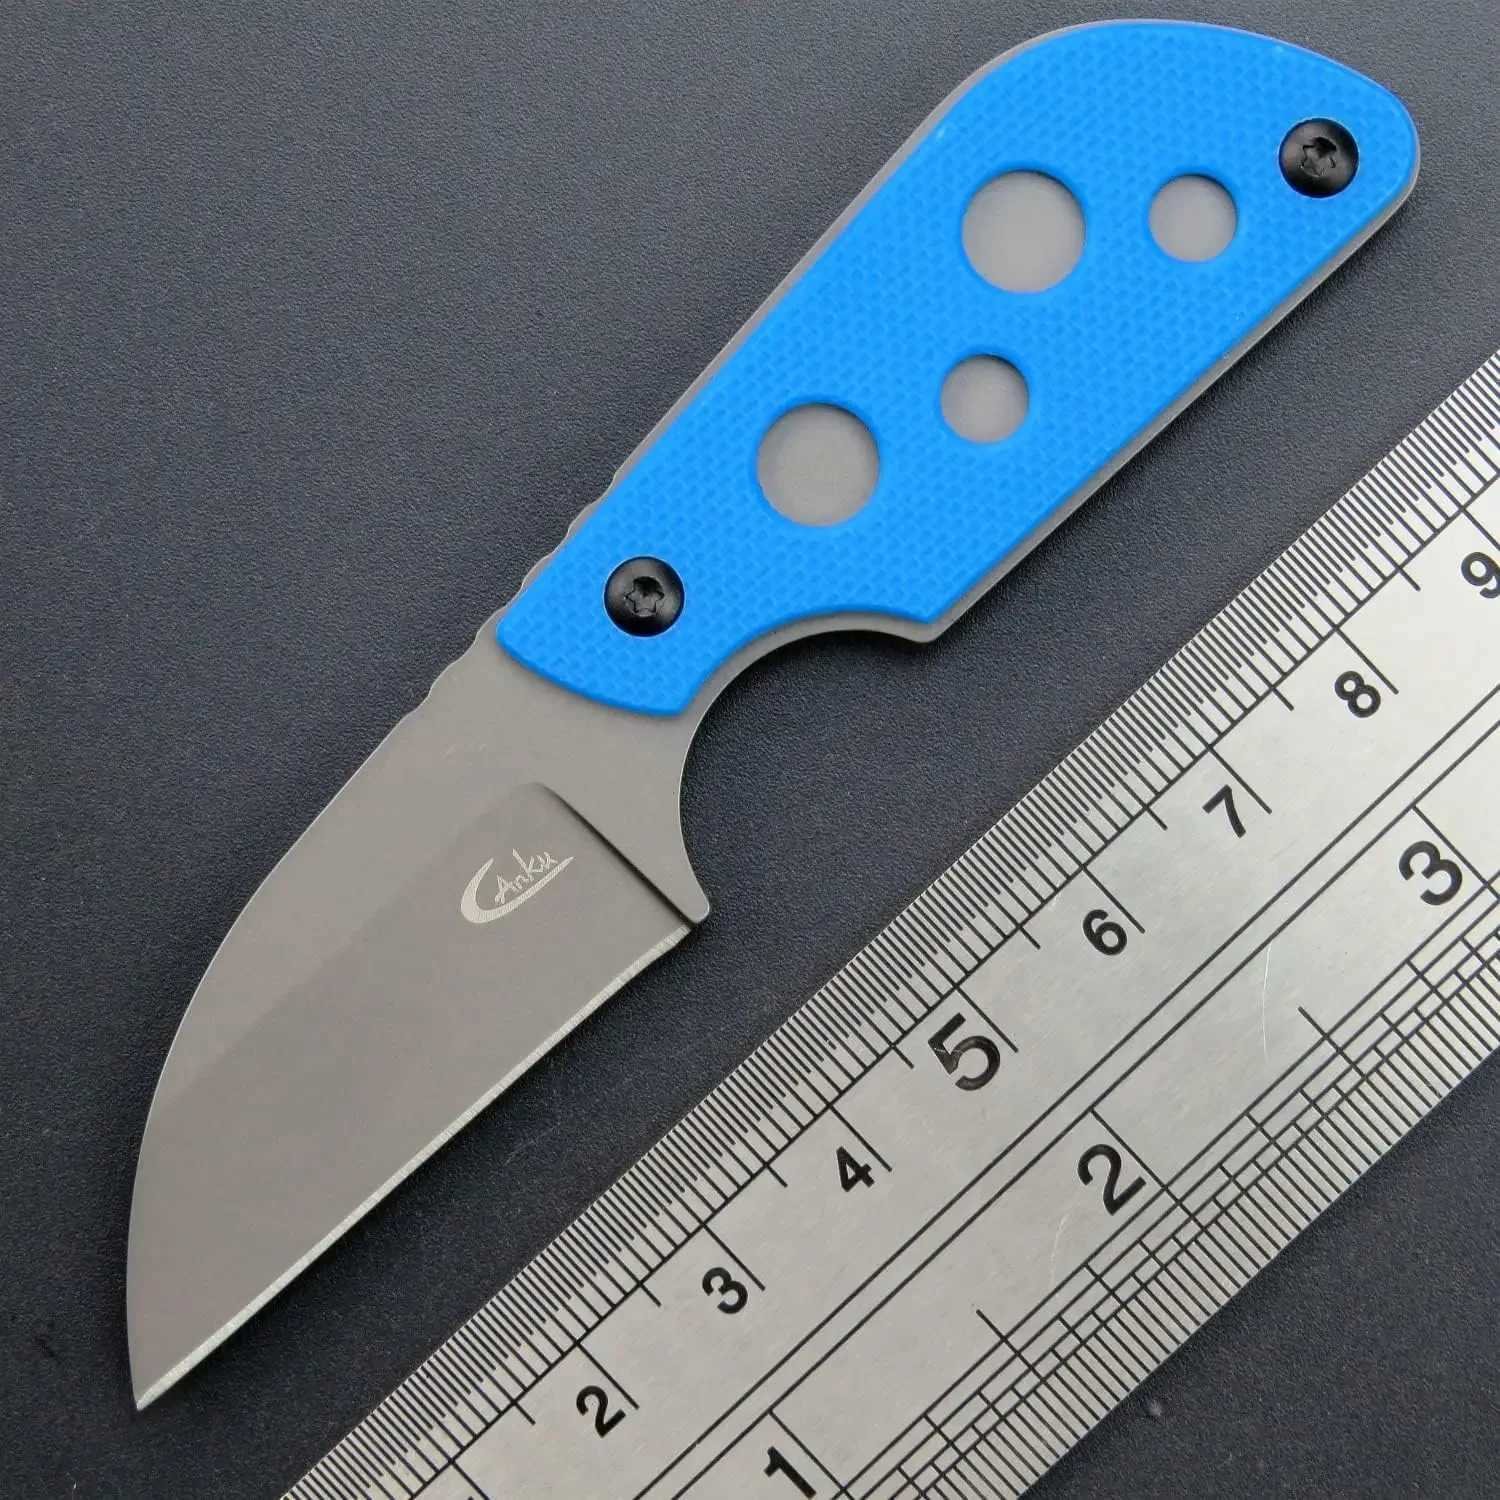 Tactical Knives Eafengrow C1297 Fixed Blade Knife 9Cr18Mov Blade G10 Handle EDC Tool Neck Knife for Outdoor Camping Hiking with kydex SheathL2403